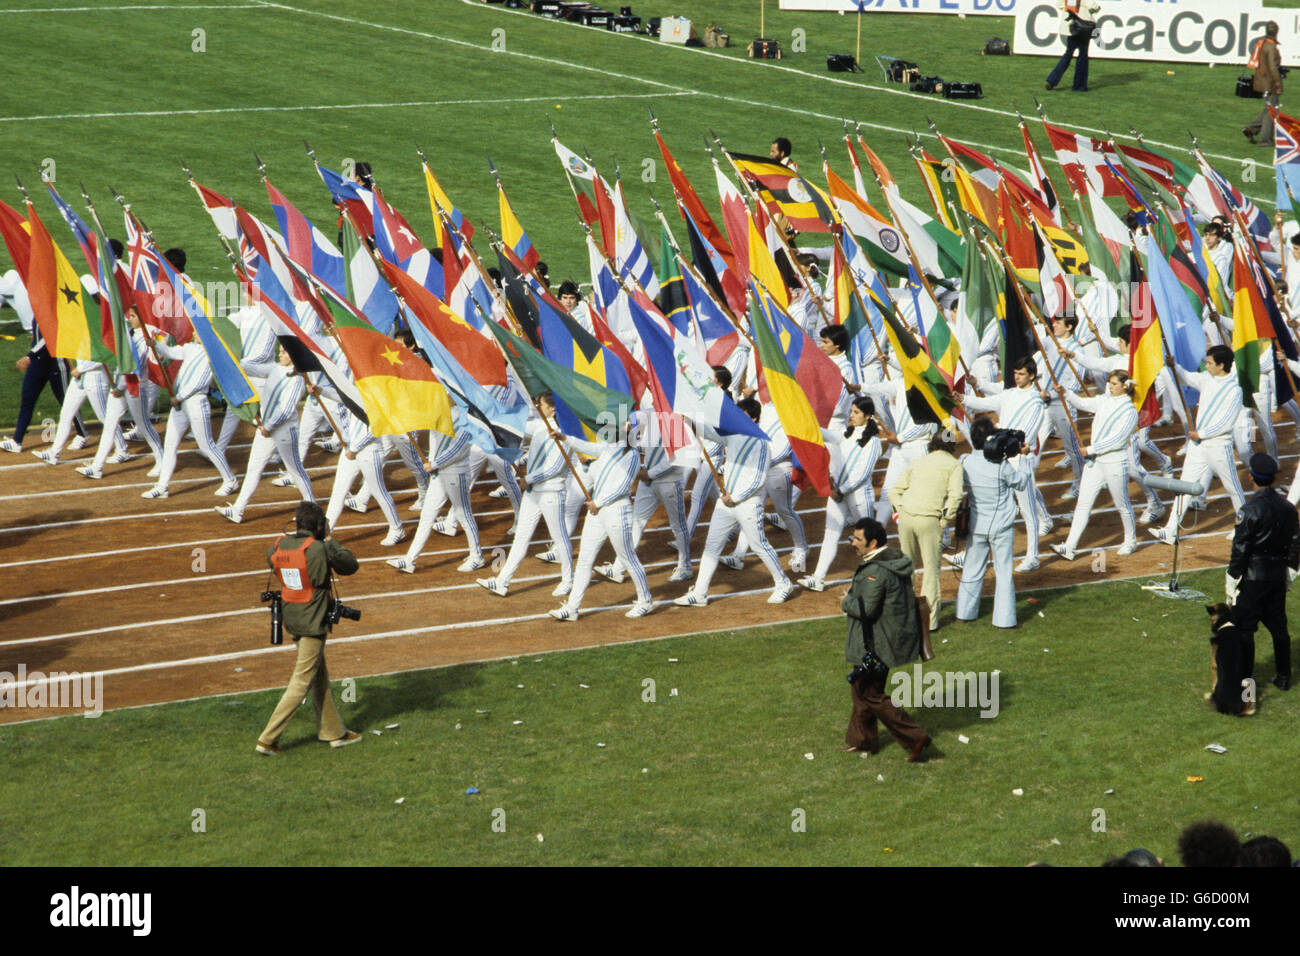 Soccer - FIFA World Cup Argentina 1978 - Opening Ceremony - Estadio Monumental. Flag bearers during the opening ceremony. Stock Photo